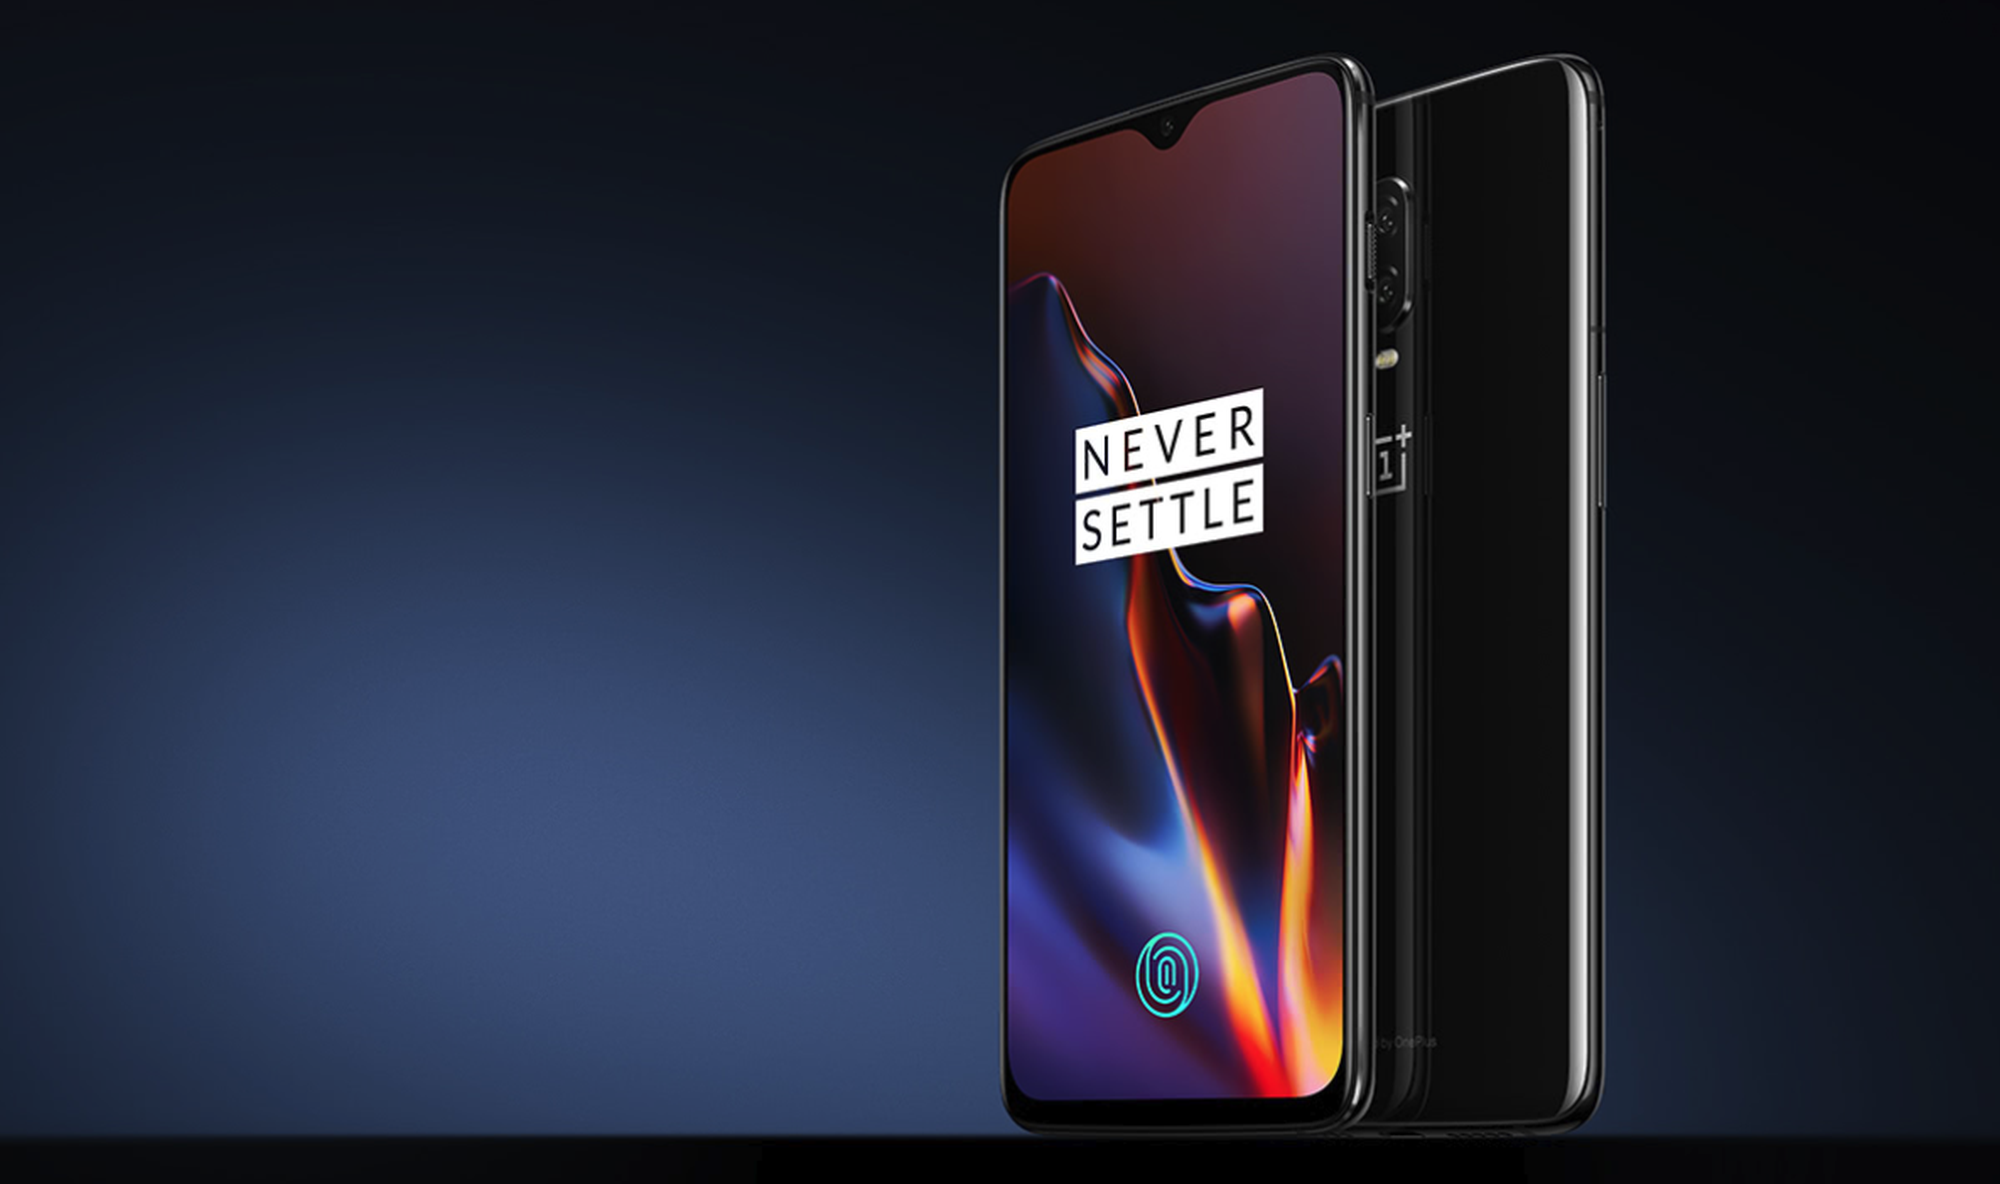 T-Mobile OnePlus 6T software update enhances in-display fingerprint scanner, Nightscape, and more